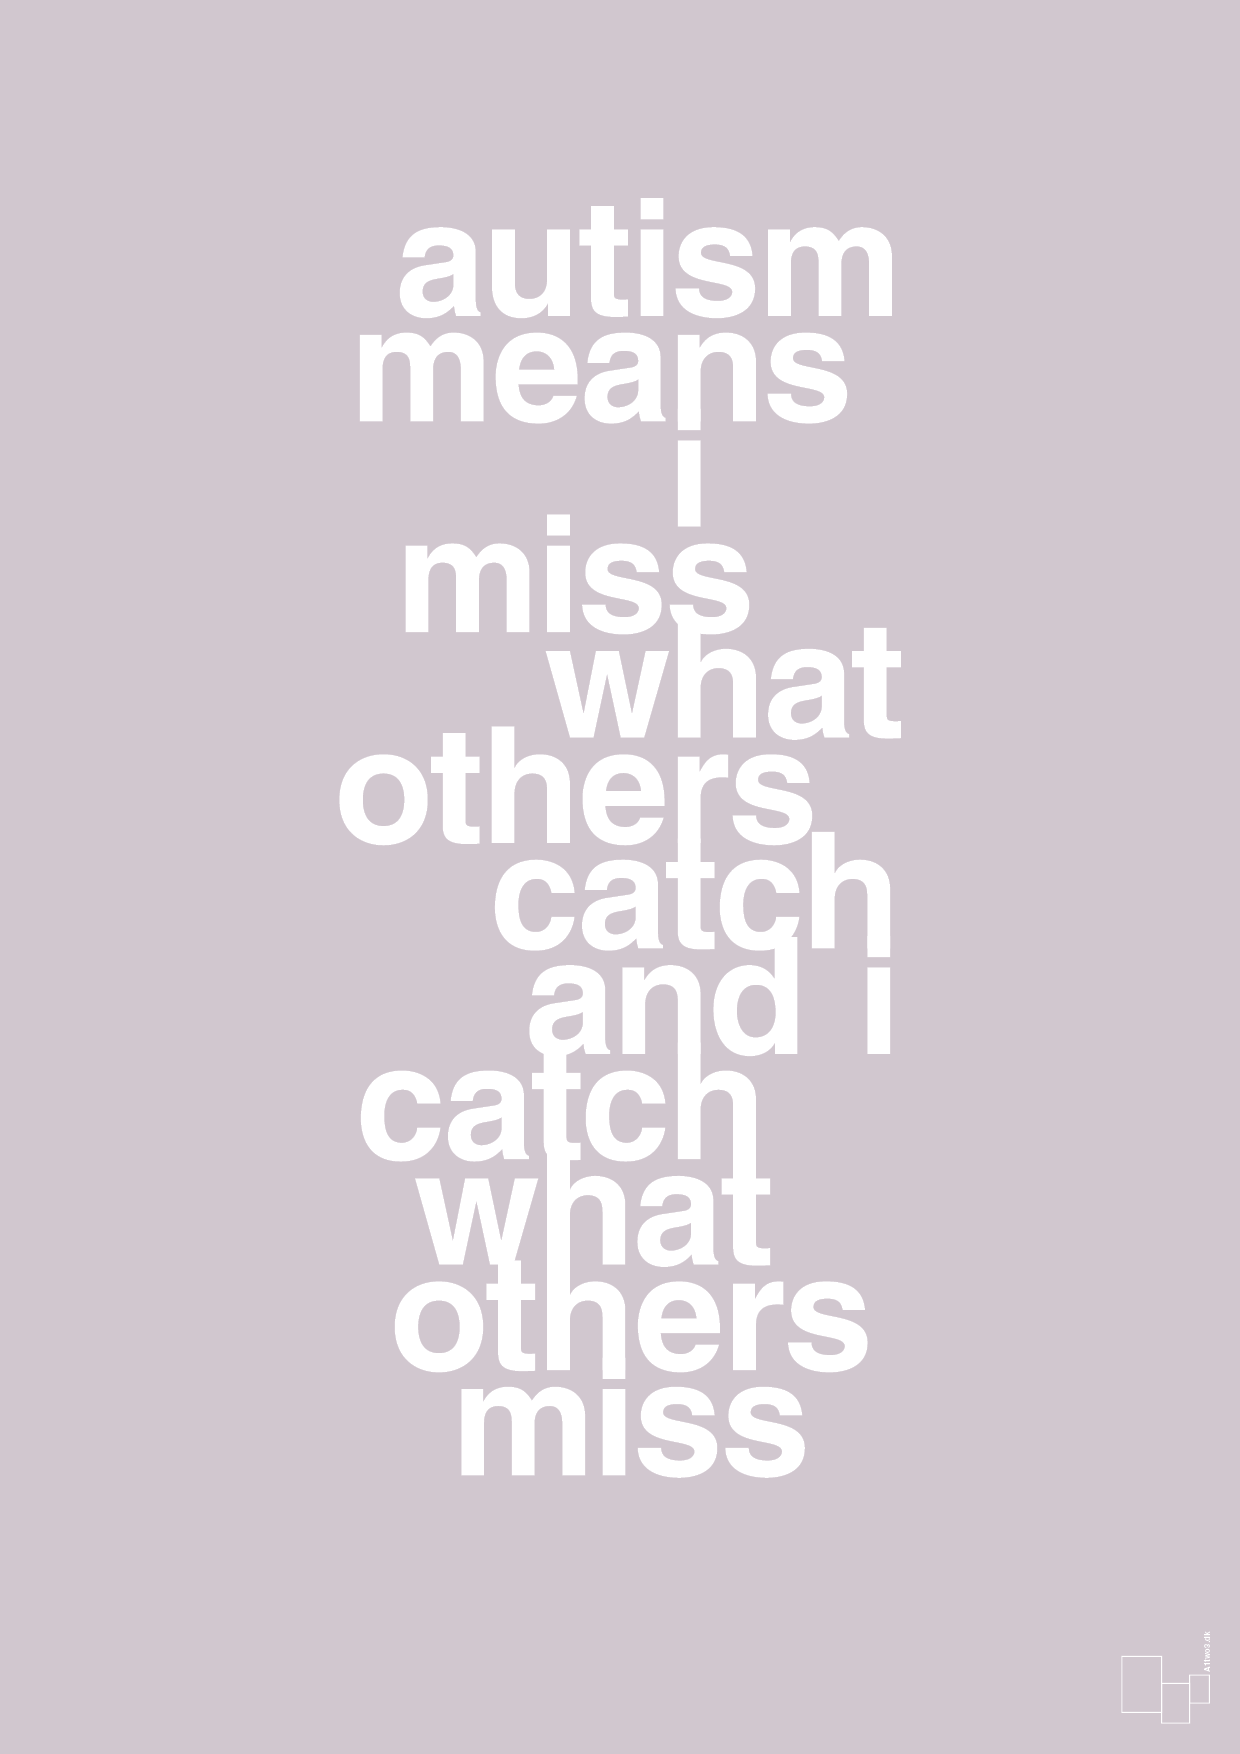 autism means i miss what others catch and i catch what others miss - Plakat med Samfund i Dusty Lilac